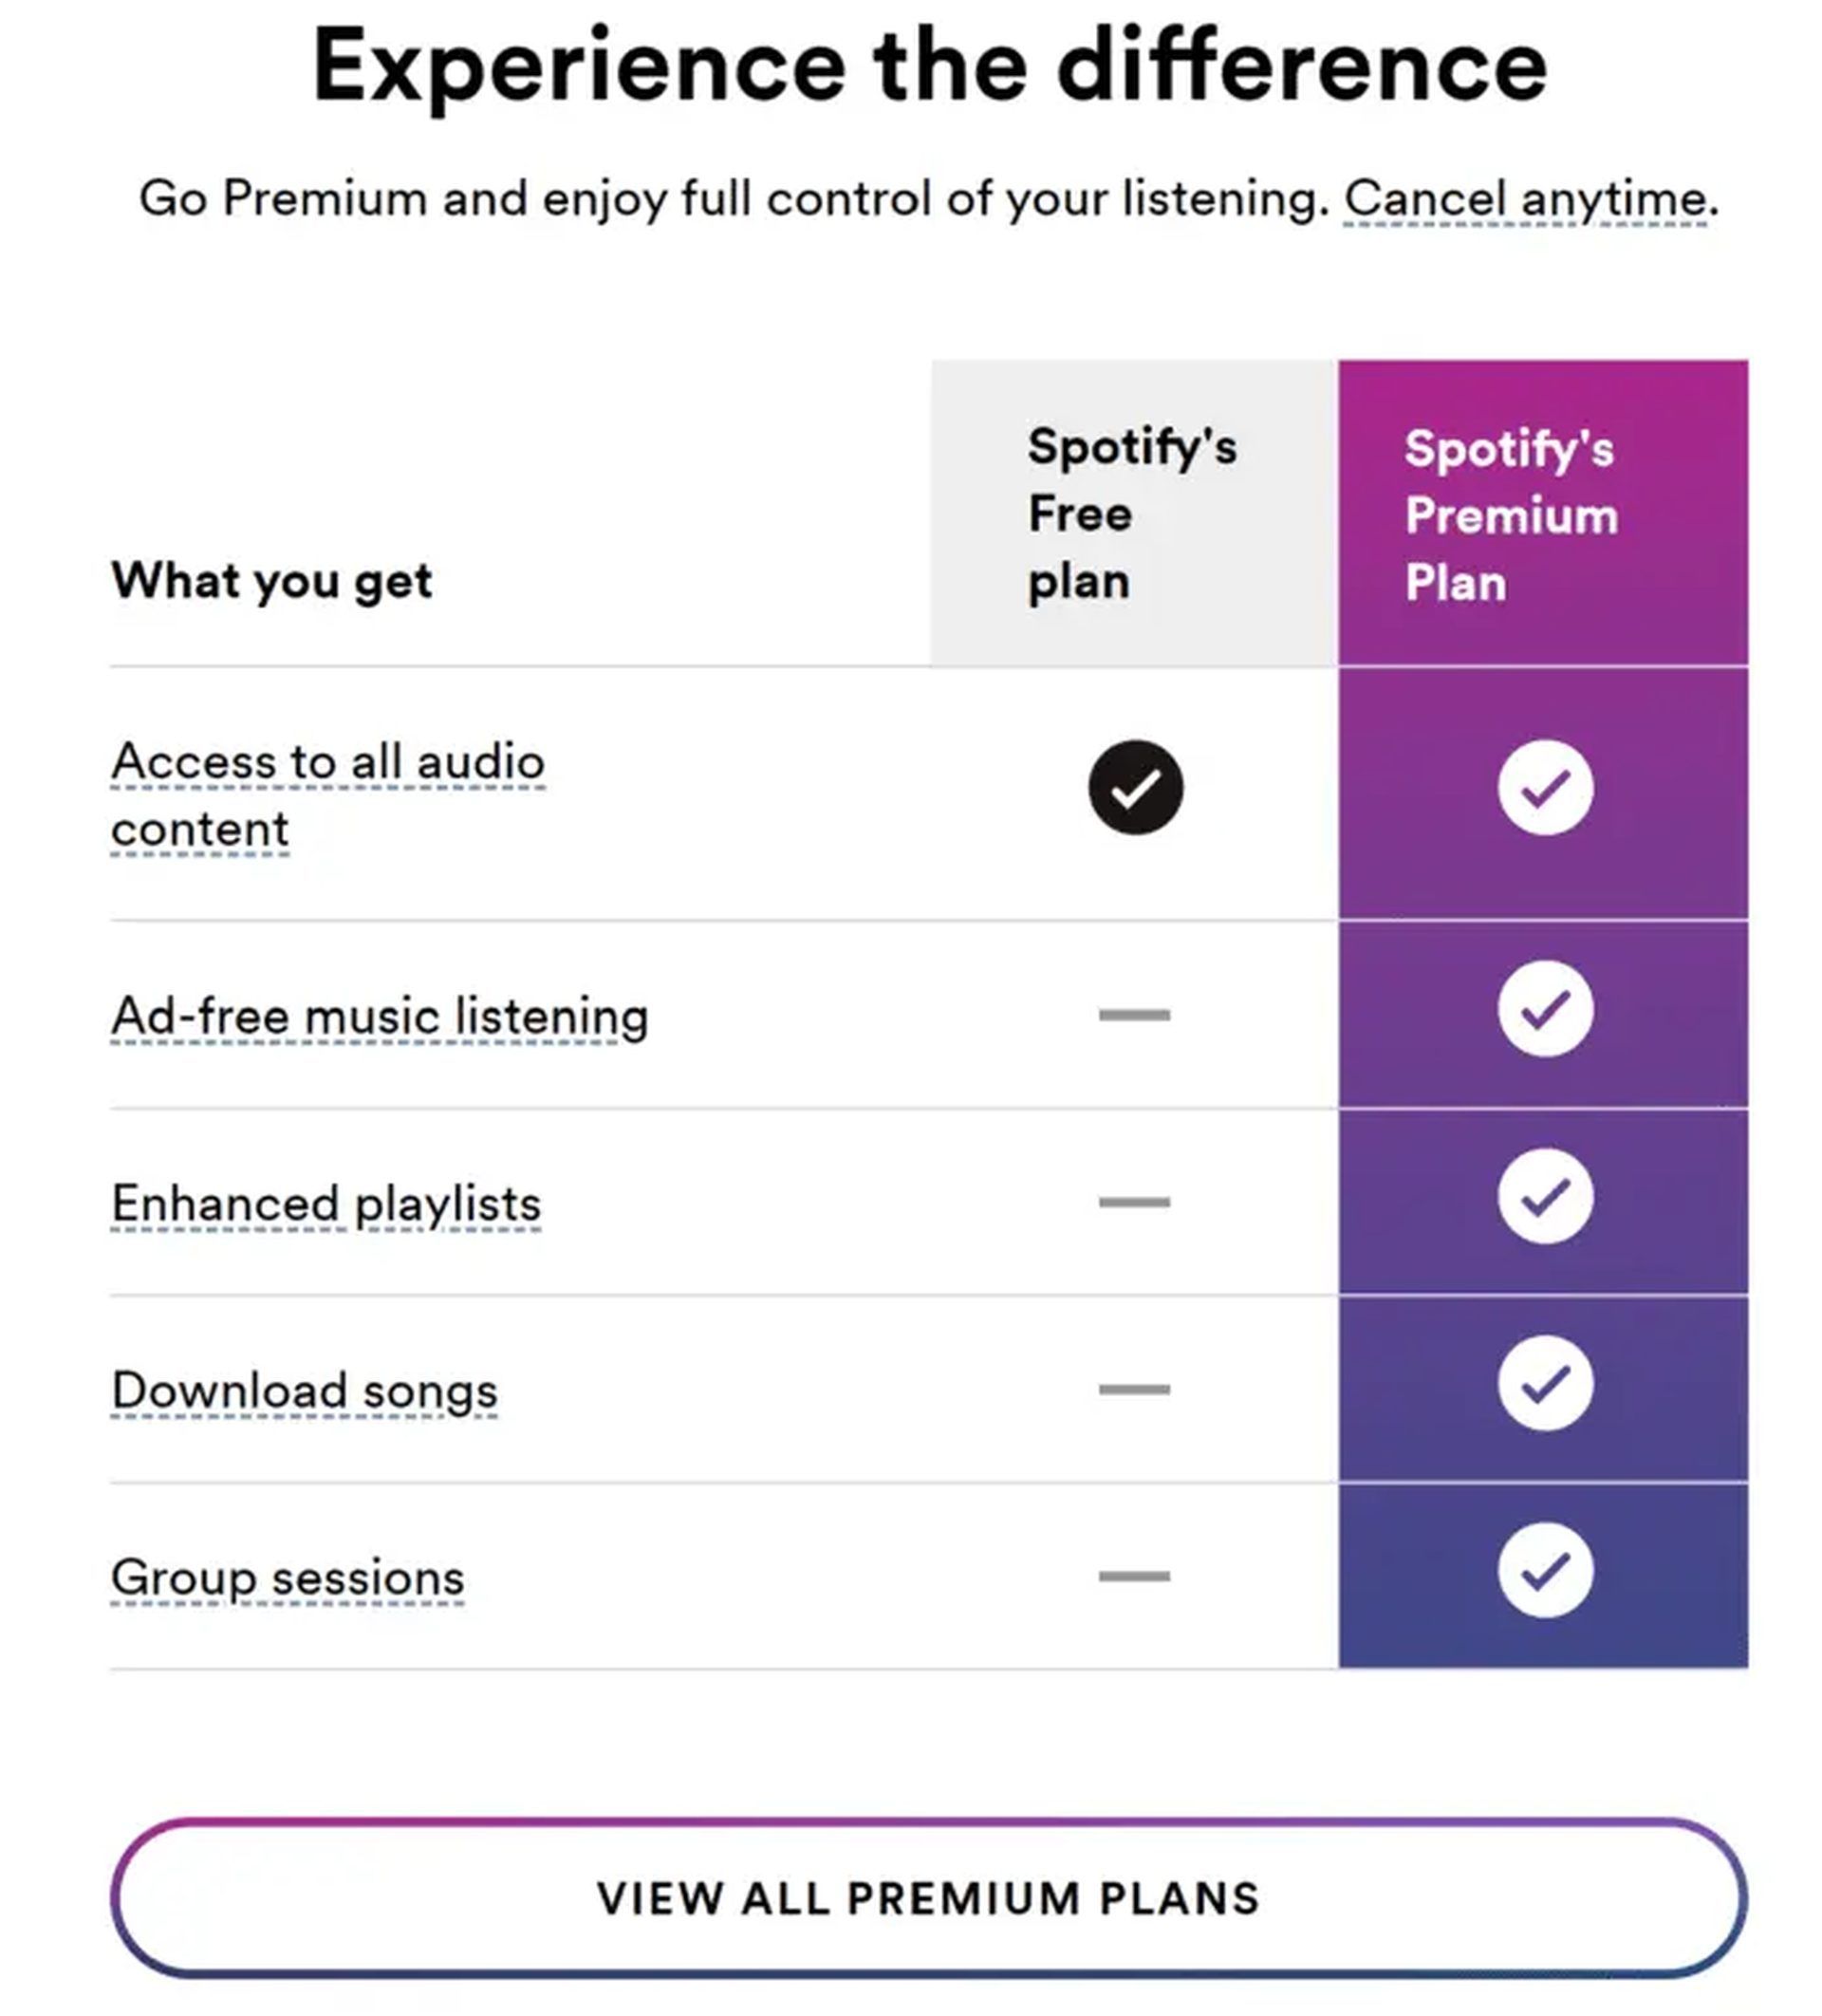 Spotify Premium 4 months free offer: How to get it?